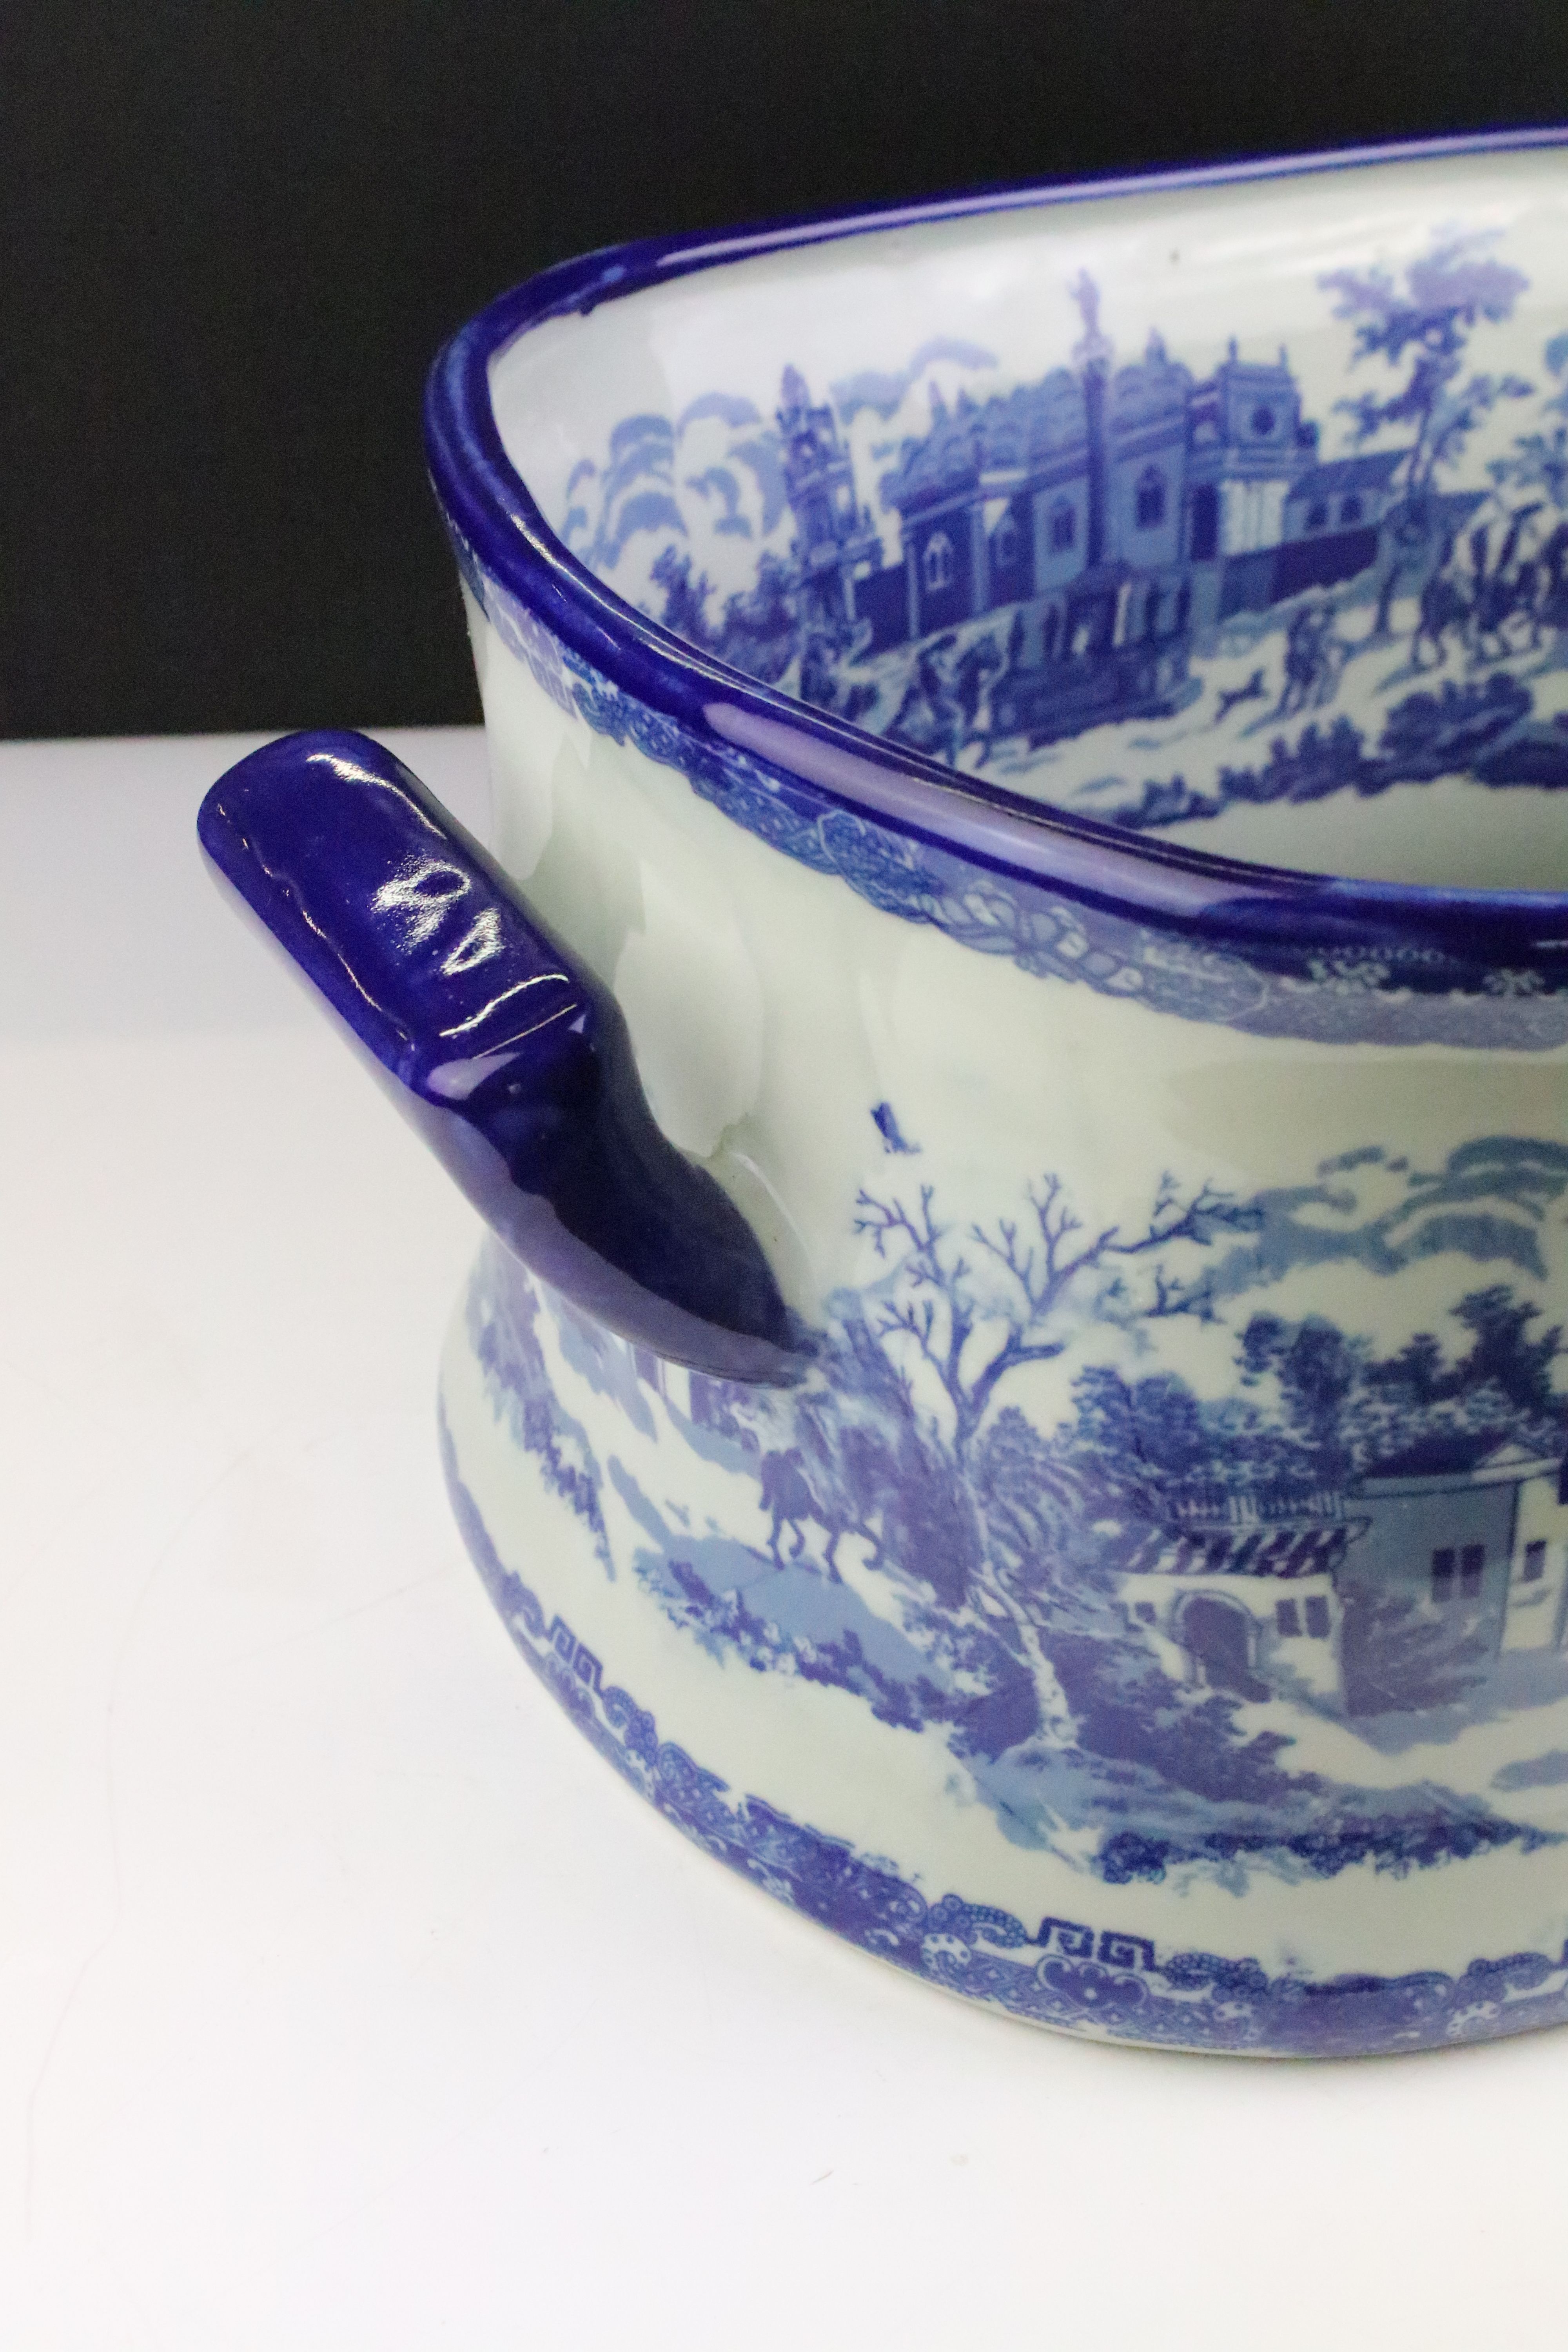 Large 19th century style Blue and White Ironstone Twin Handled Footbath, 47cm long x 21cm high - Image 3 of 4